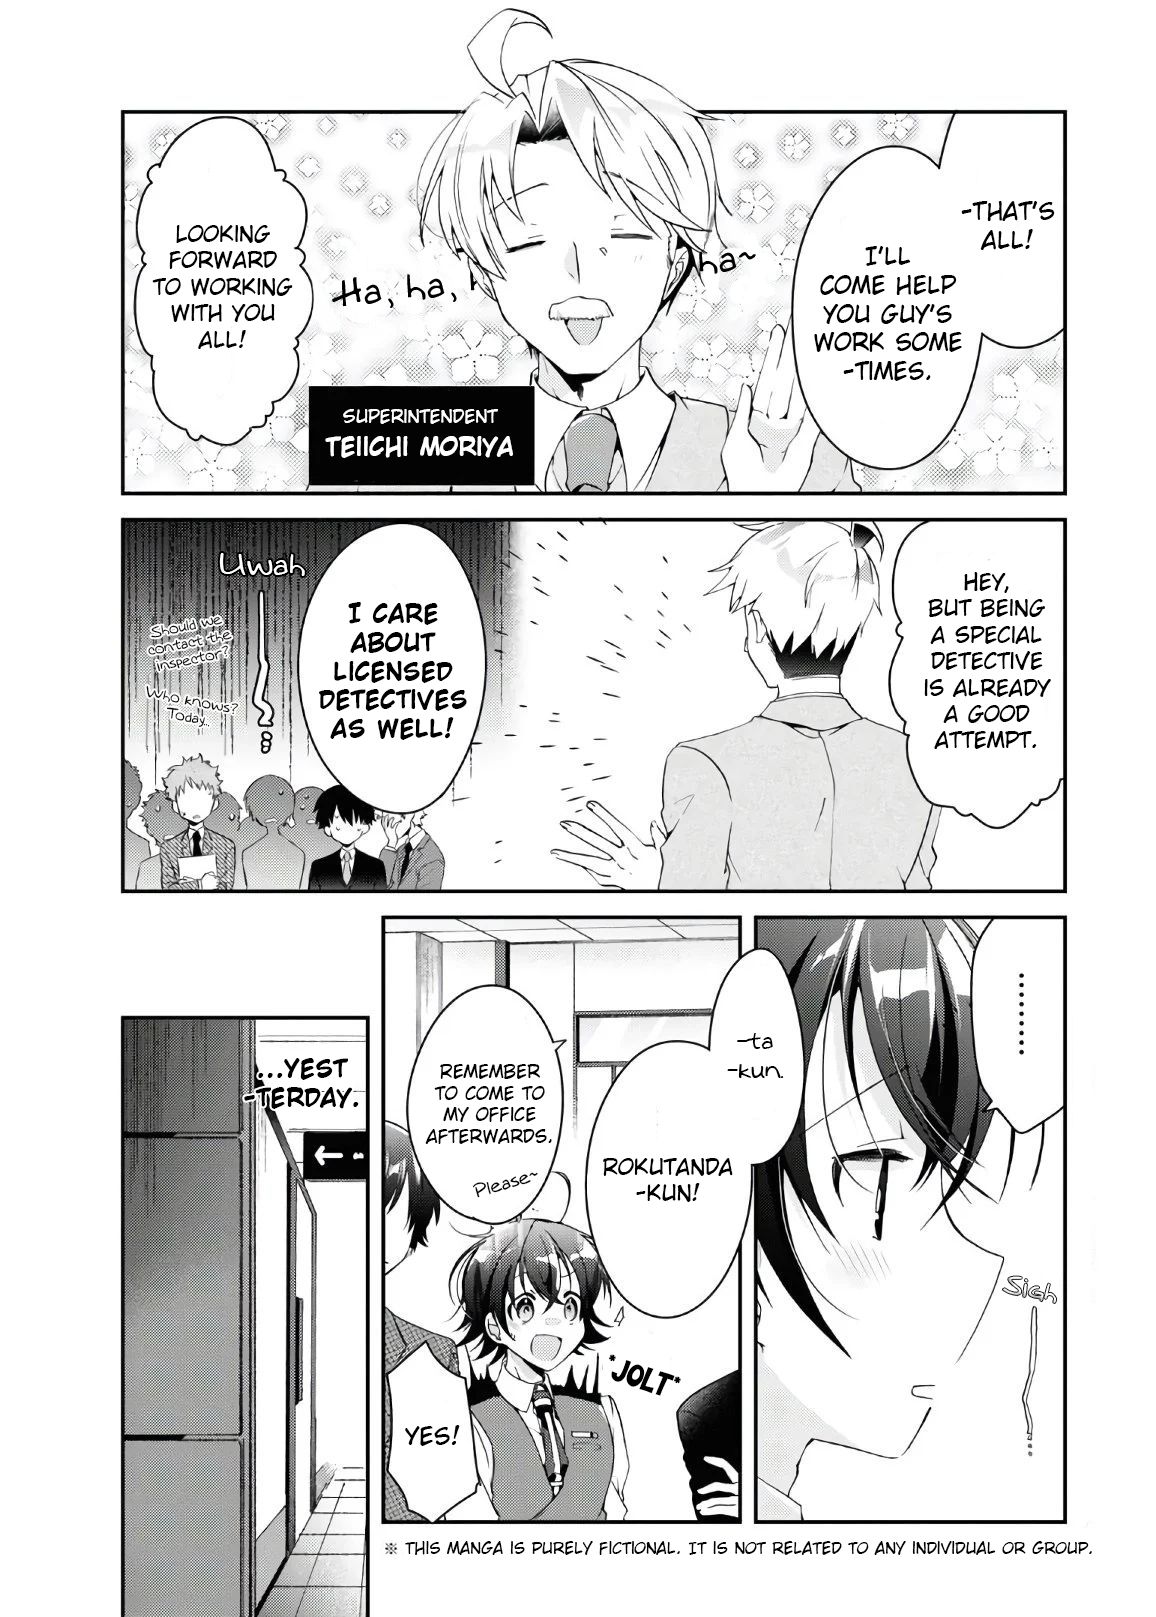 Isshiki-san Wants to Know About Love. - chapter 6 - #6